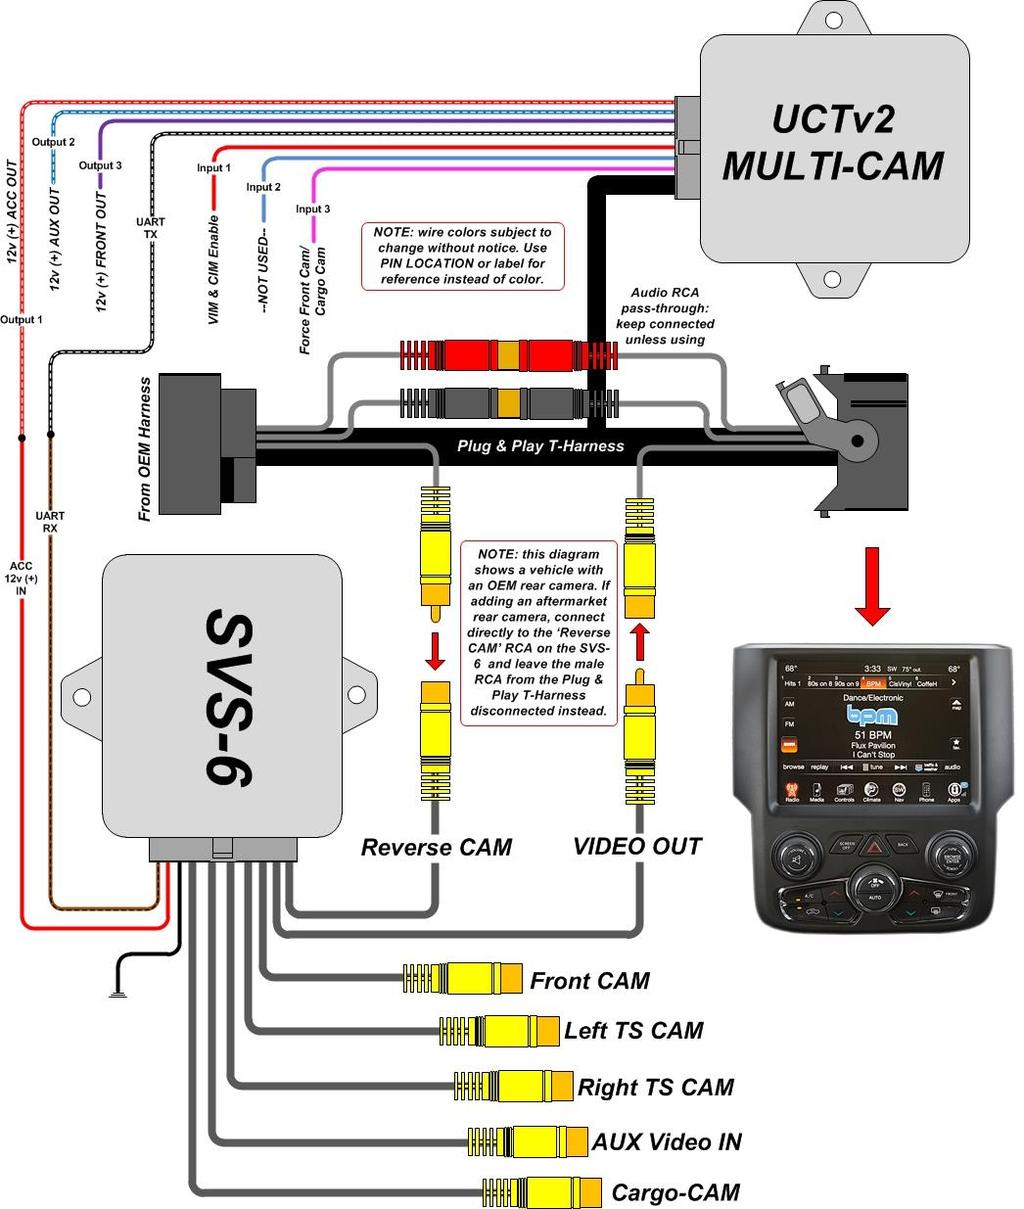 CHRY MULTI-CAM Install Diagram SVS-6 for UART control must be in this Agreement: End user agrees to use this product in